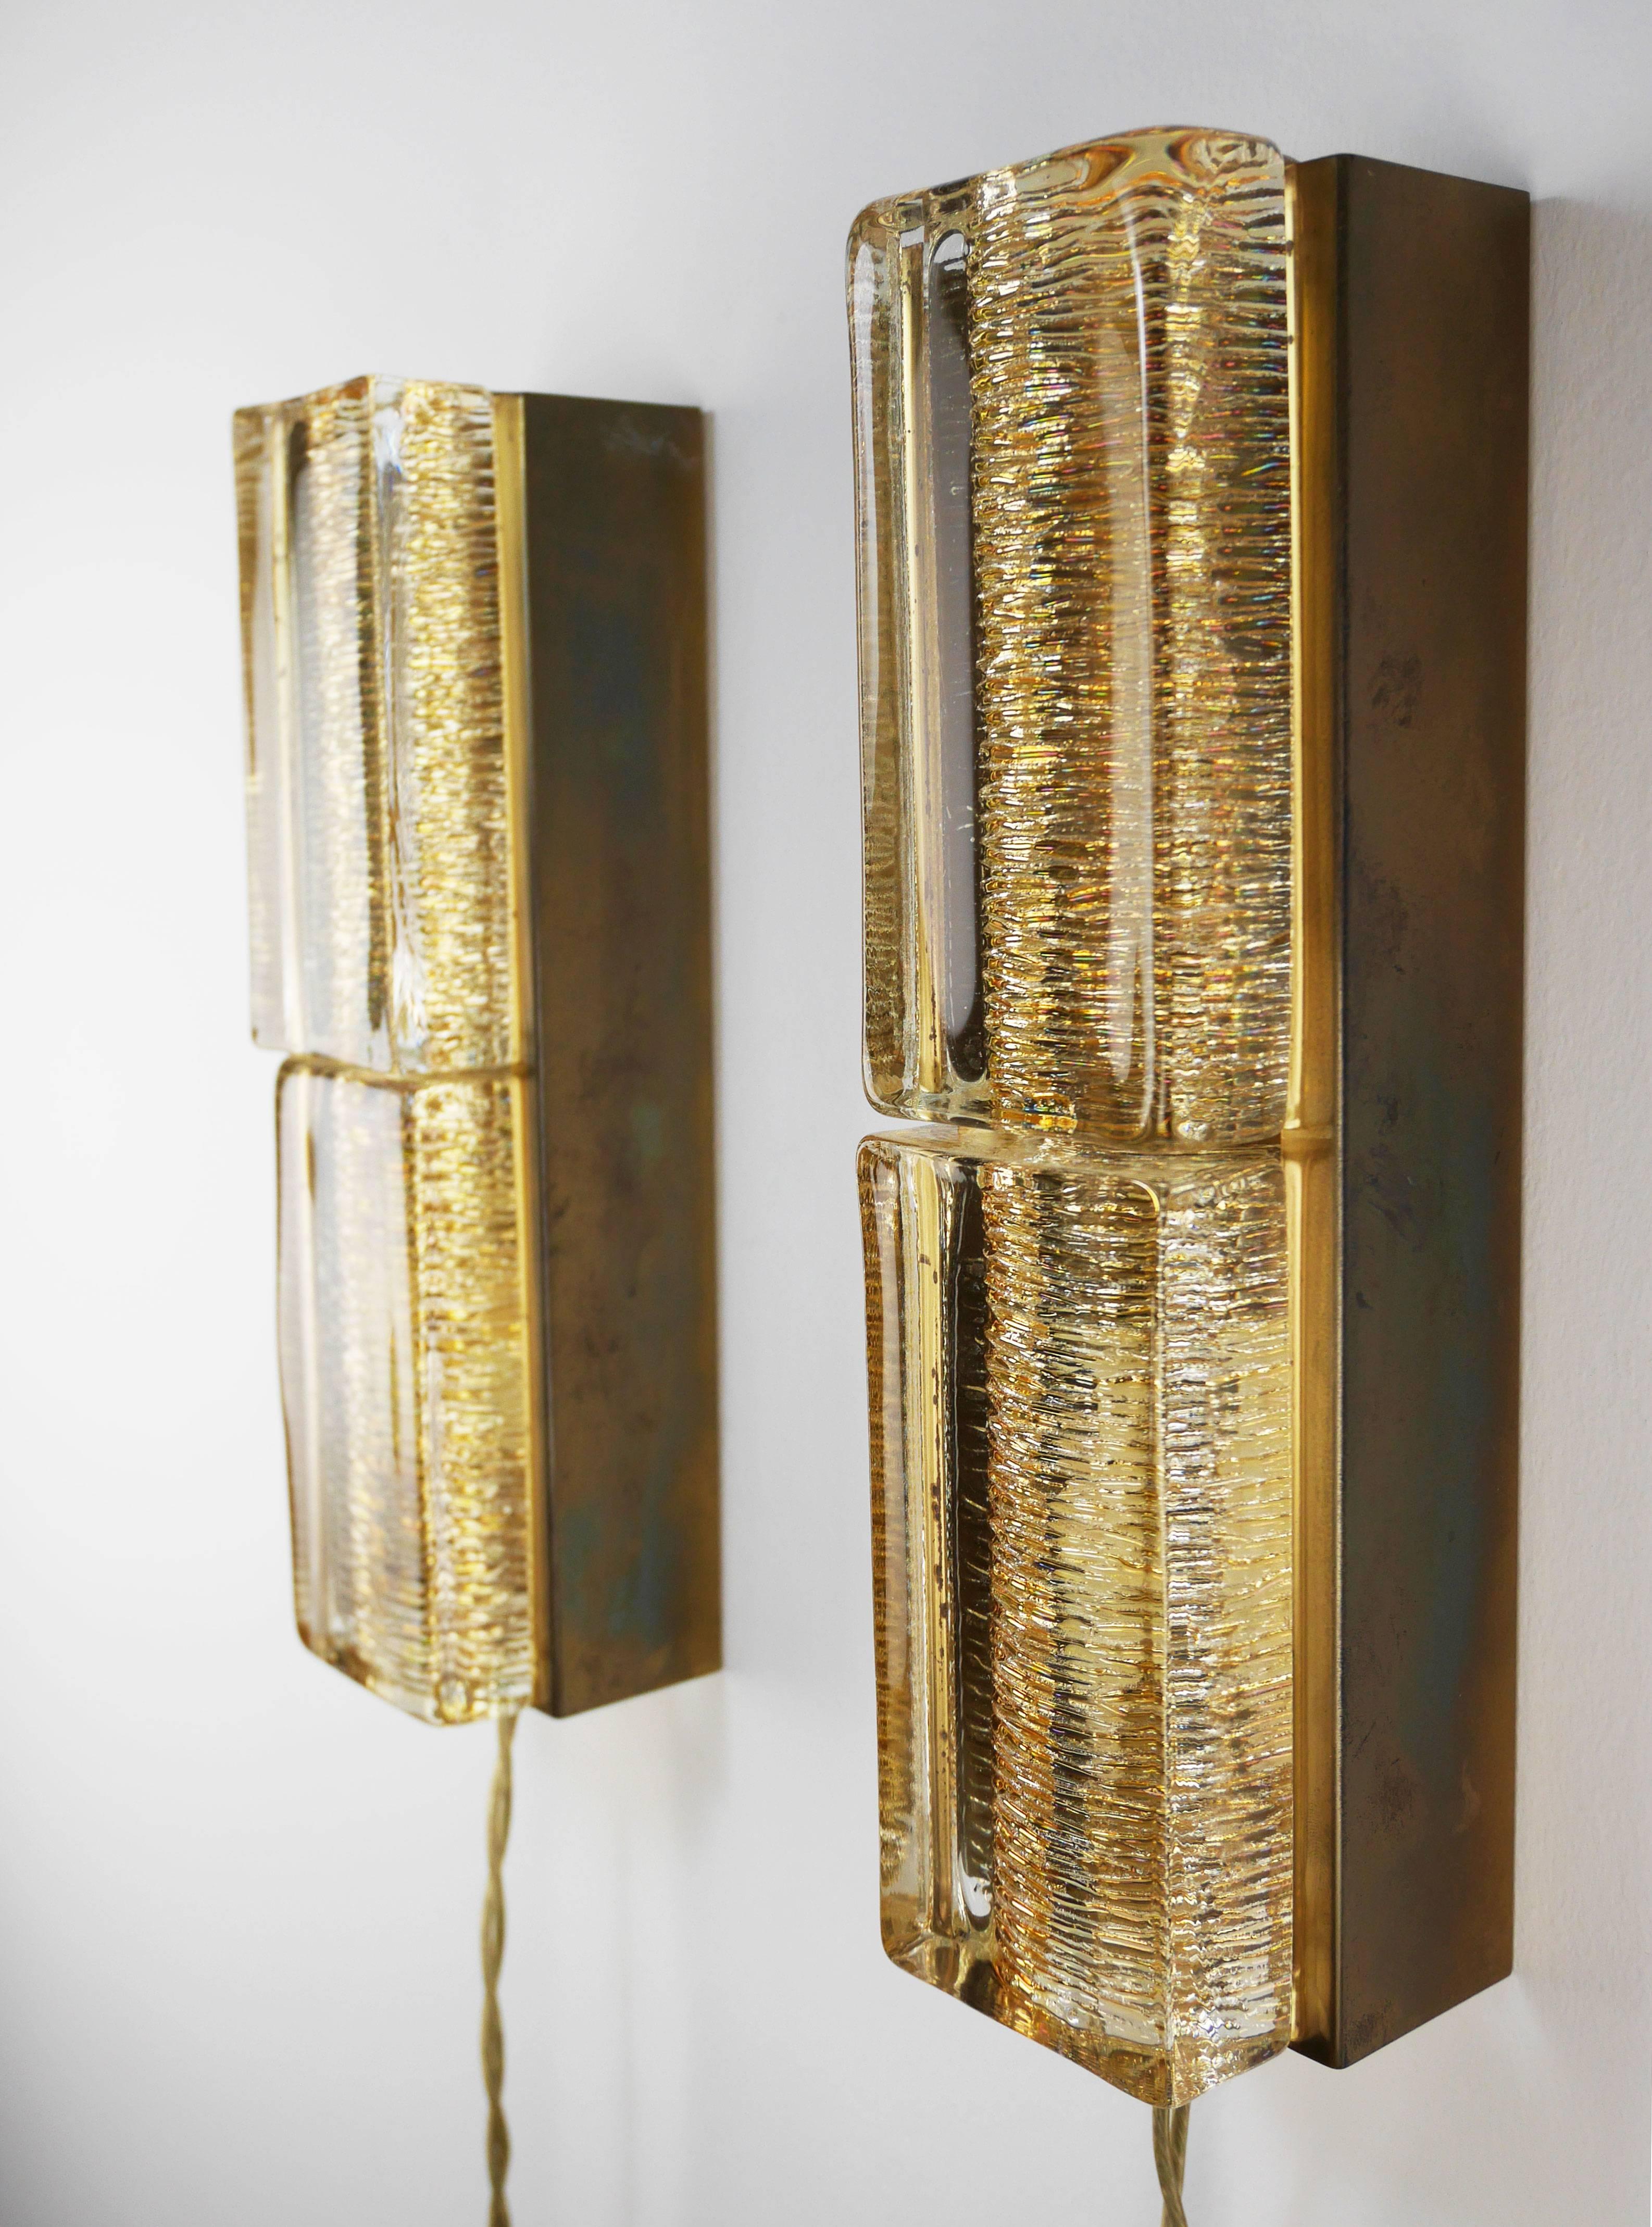 Rare pair of slender Danish modern double wall lights of solid golden glass on shiny brass mount. Produced by Danish Vitrika possibly with Orrefors glass in the 1960s.